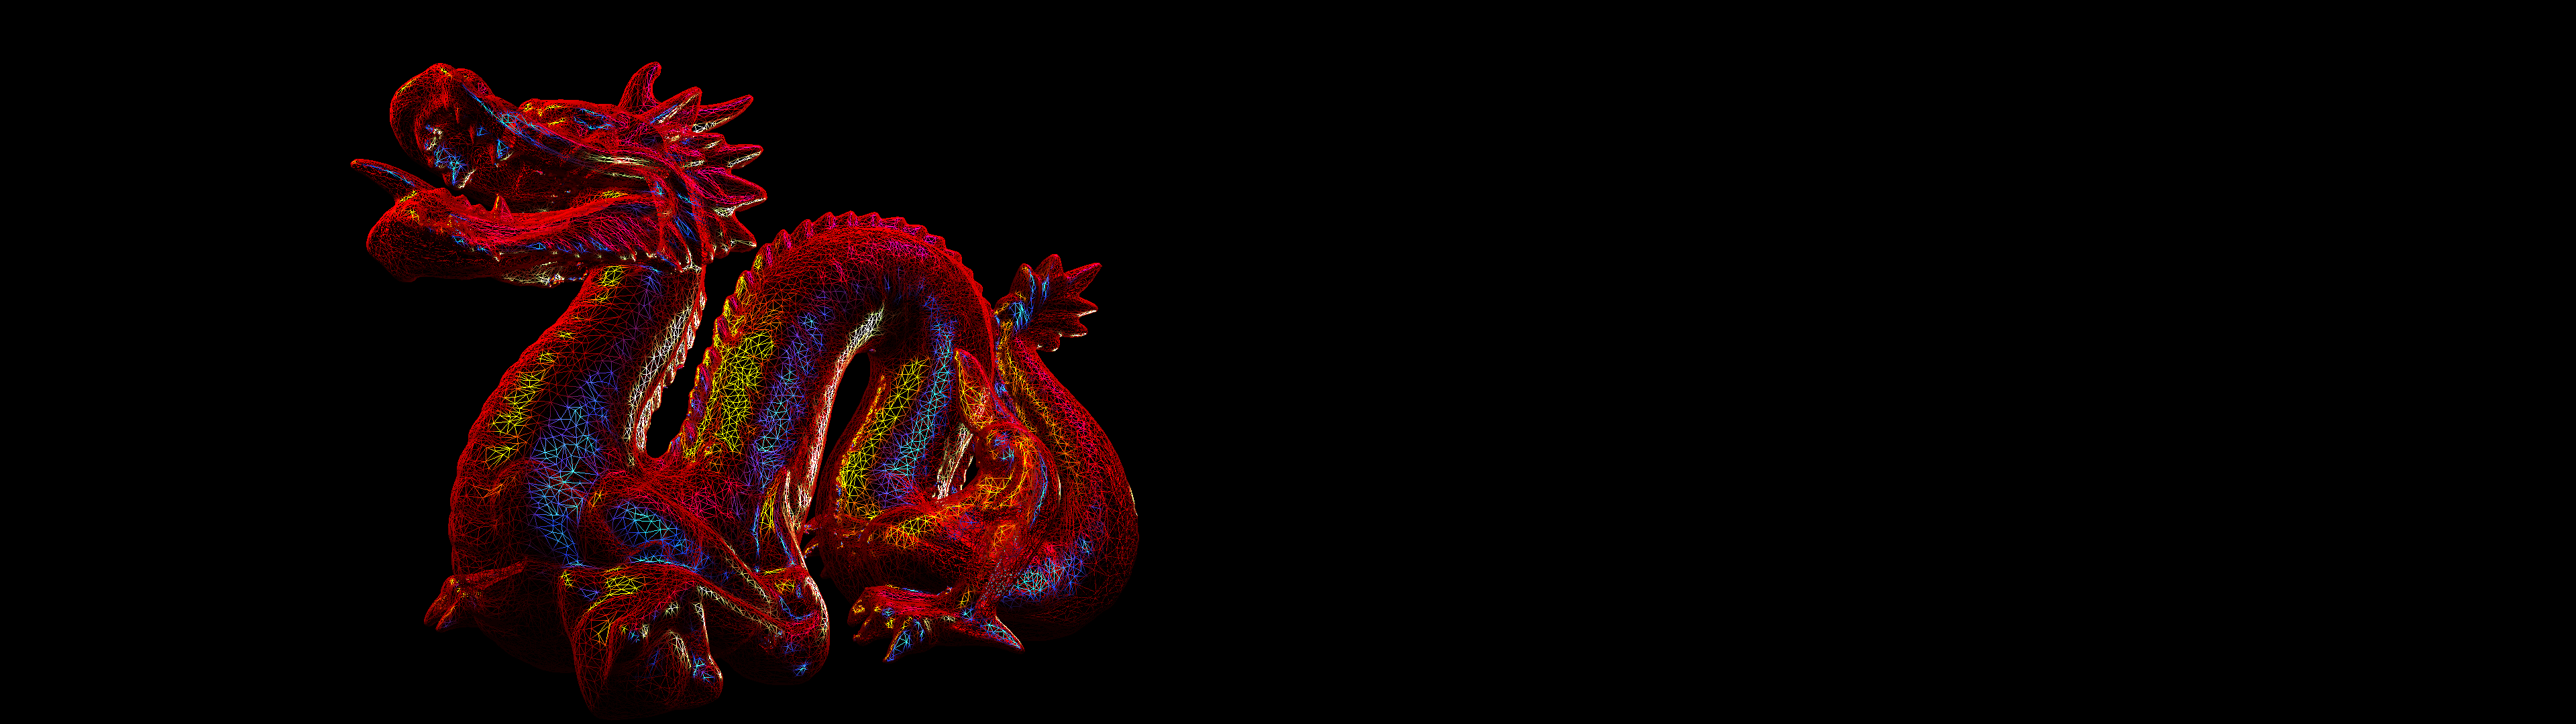 Dragon 3D Wireframe Multiple Display 3840x1080